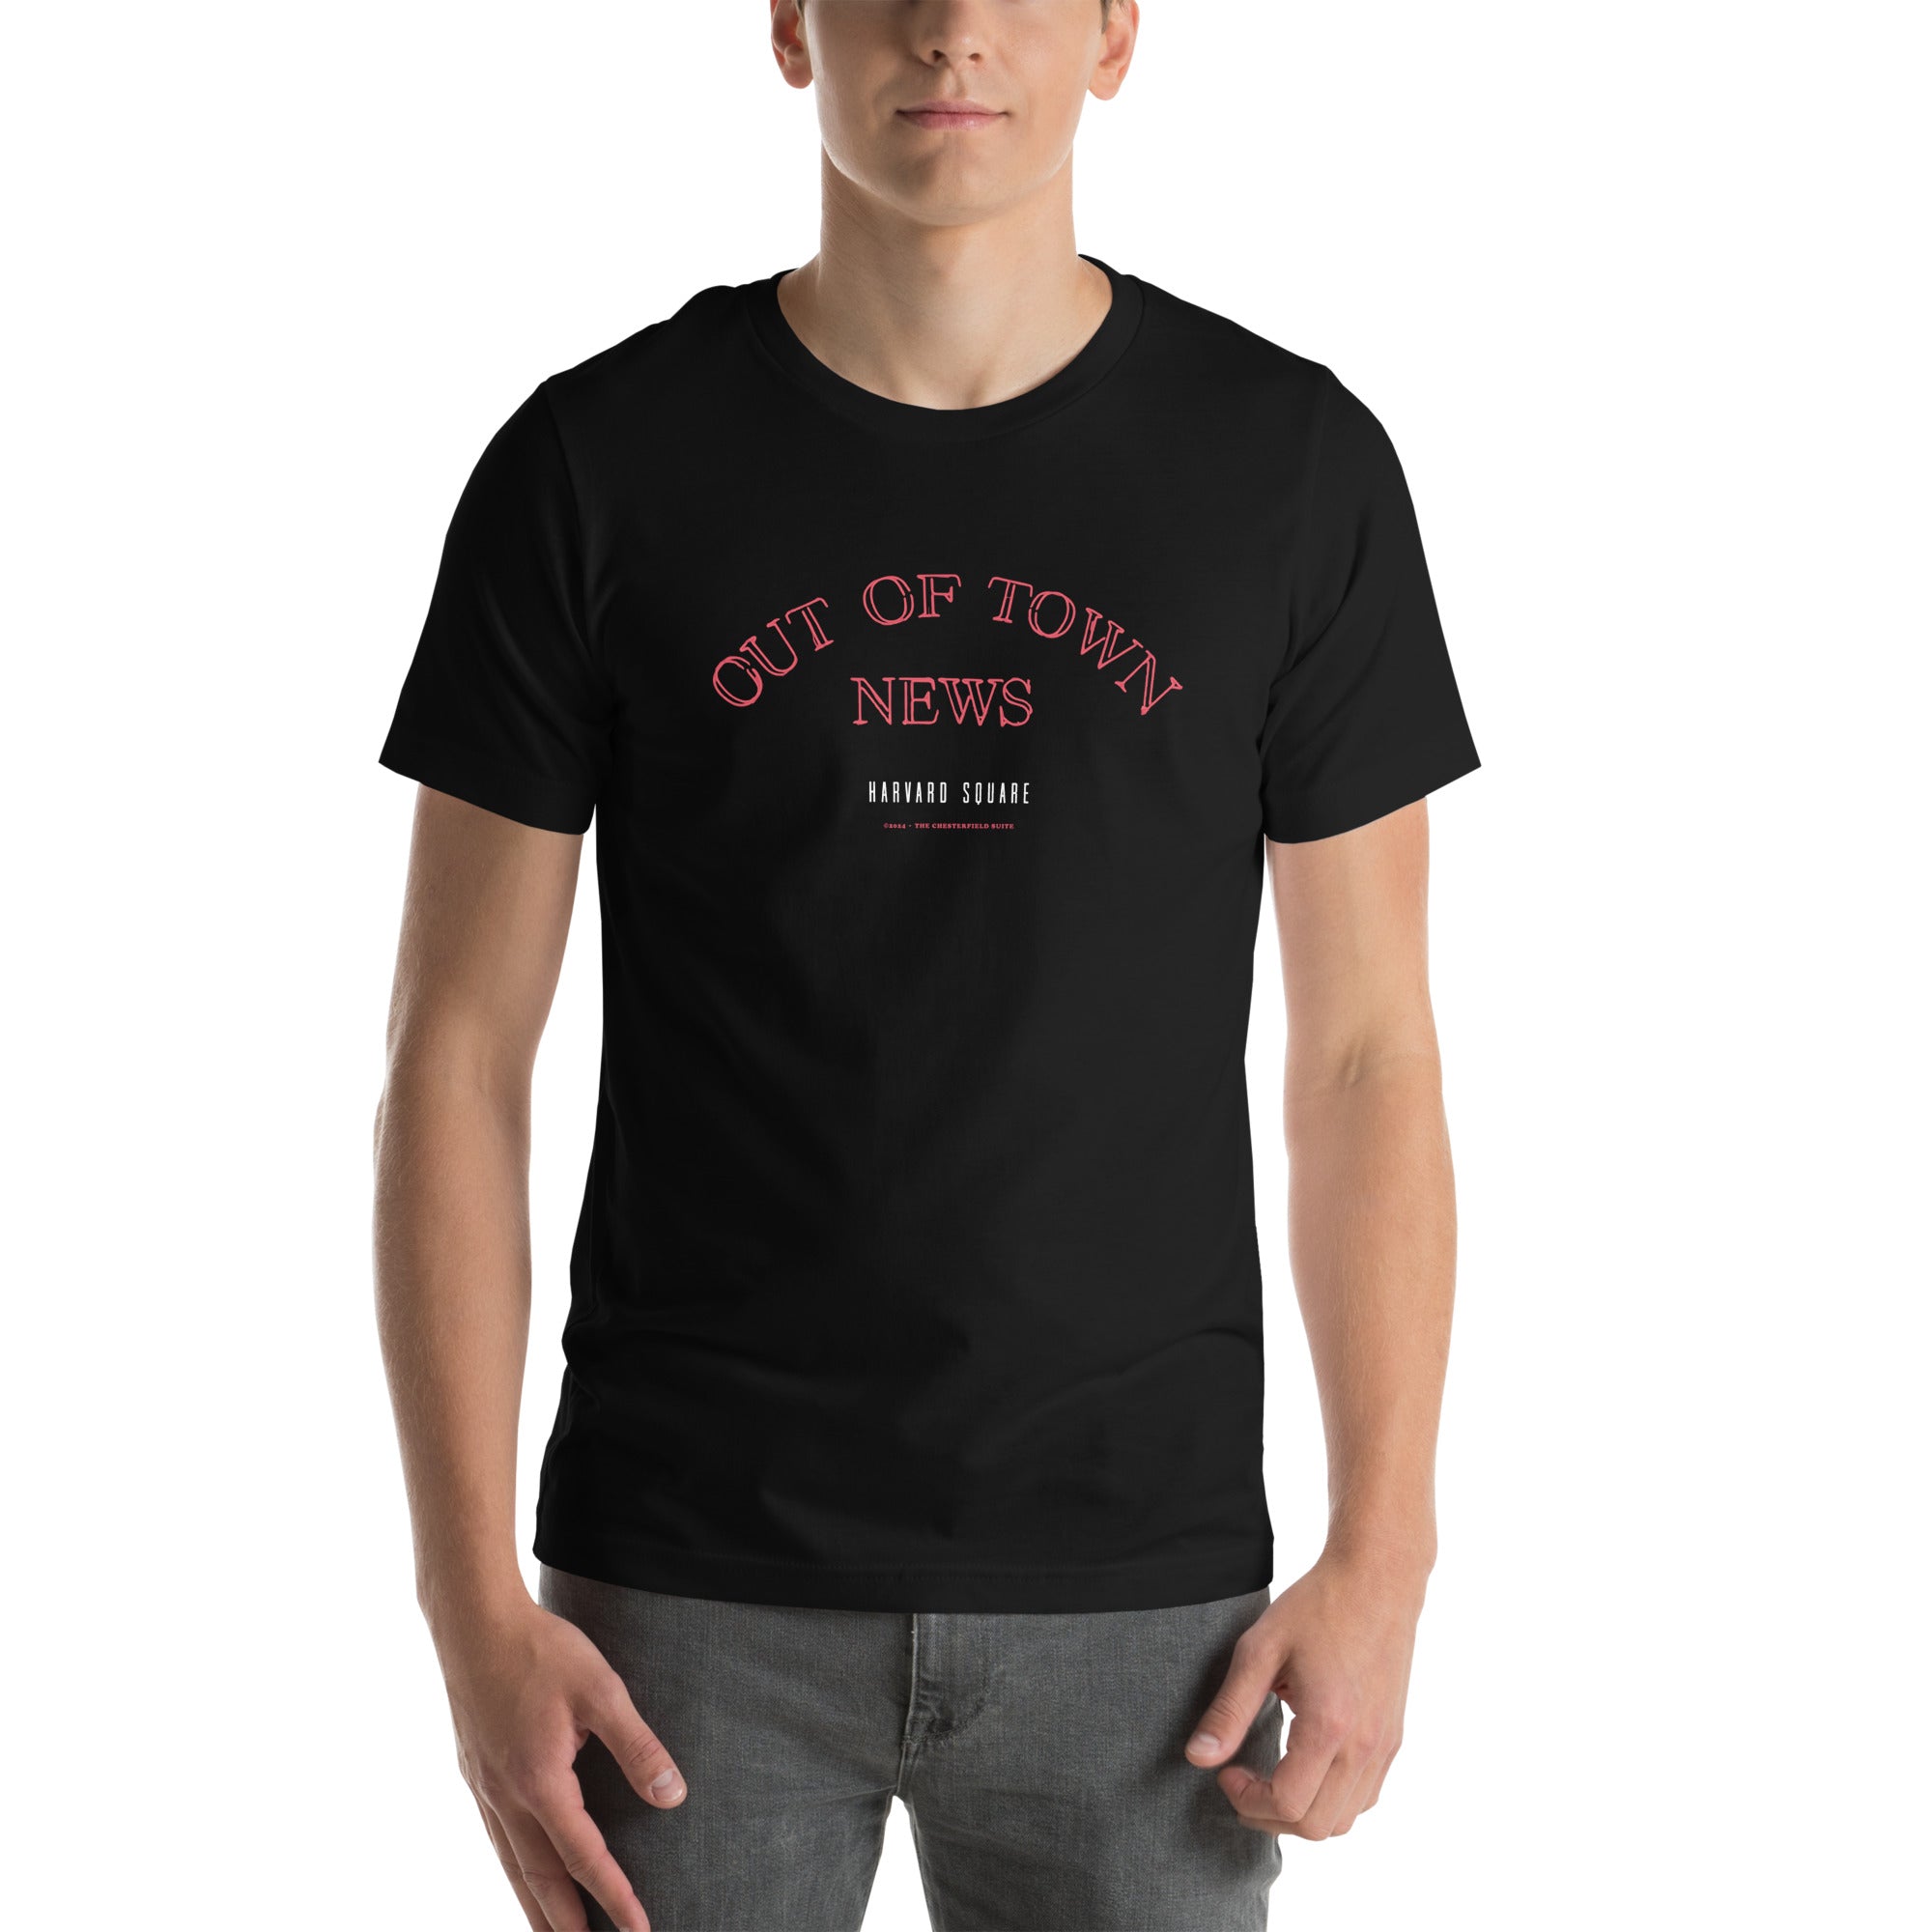 man wearing Black unisex t-shirt with Out of Town News Harvard Square written in red neon